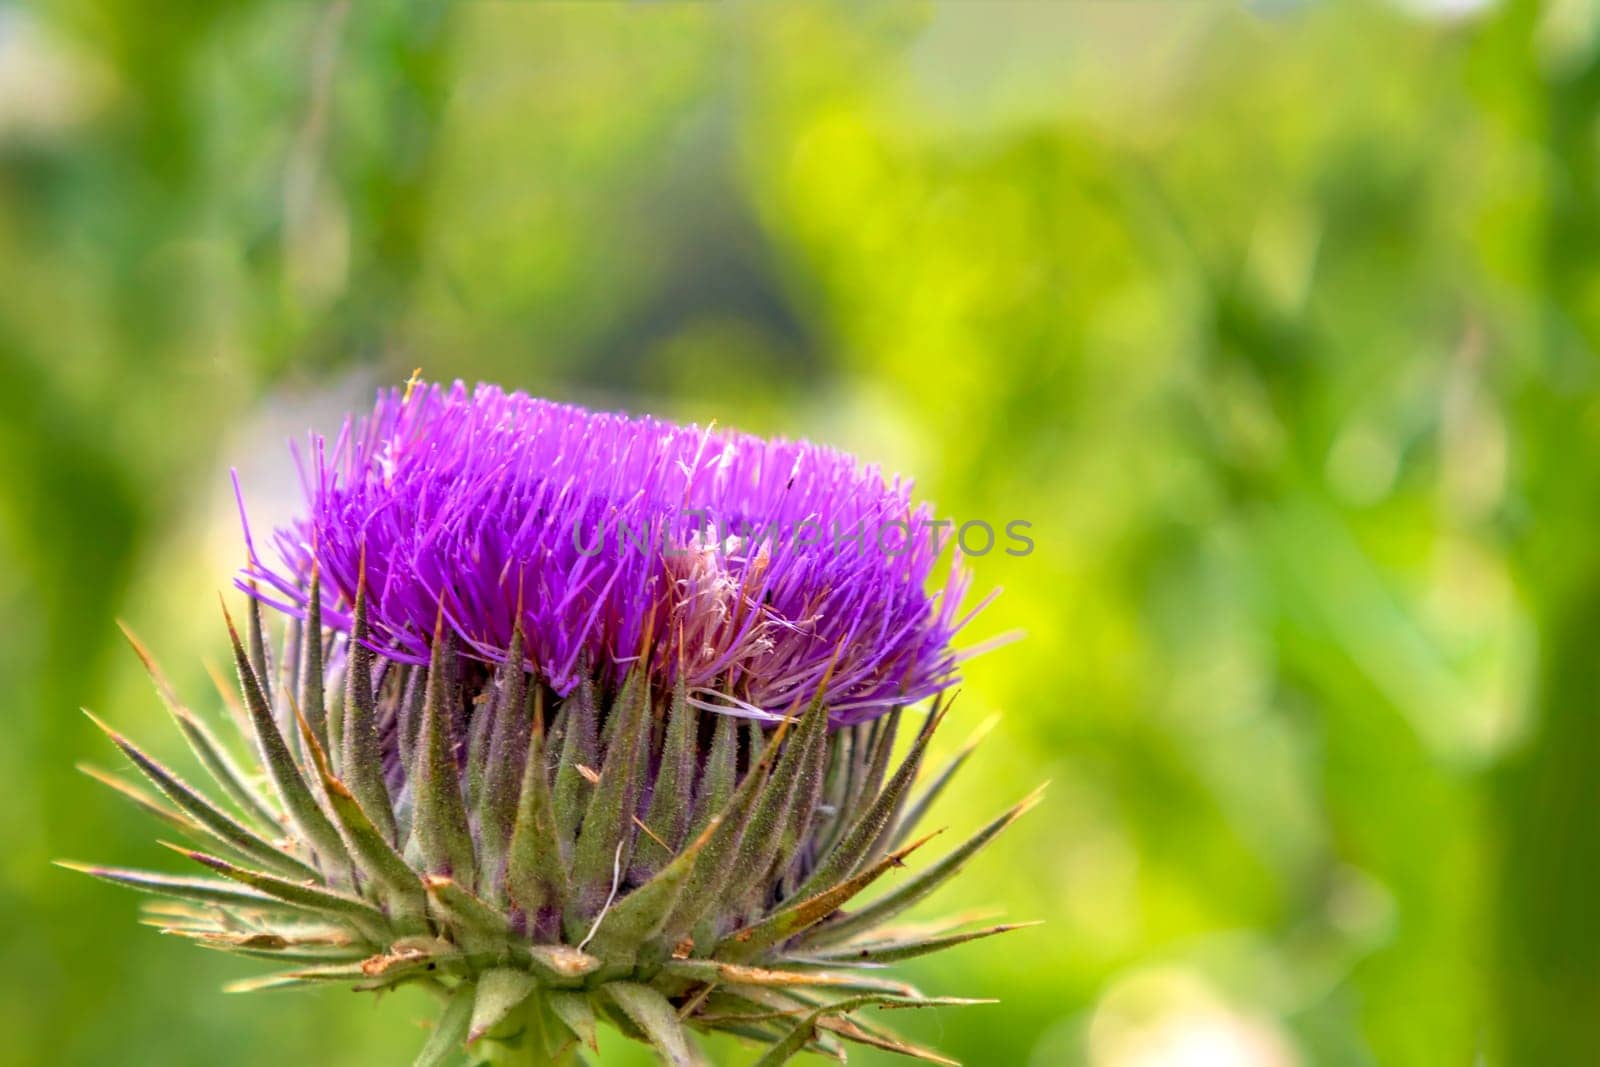 Colorful Wild-growing thistle on a green blurred background. Onopordum acanthium (cotton thistle, Scotch thistle, or Scottish thistle) by EdVal